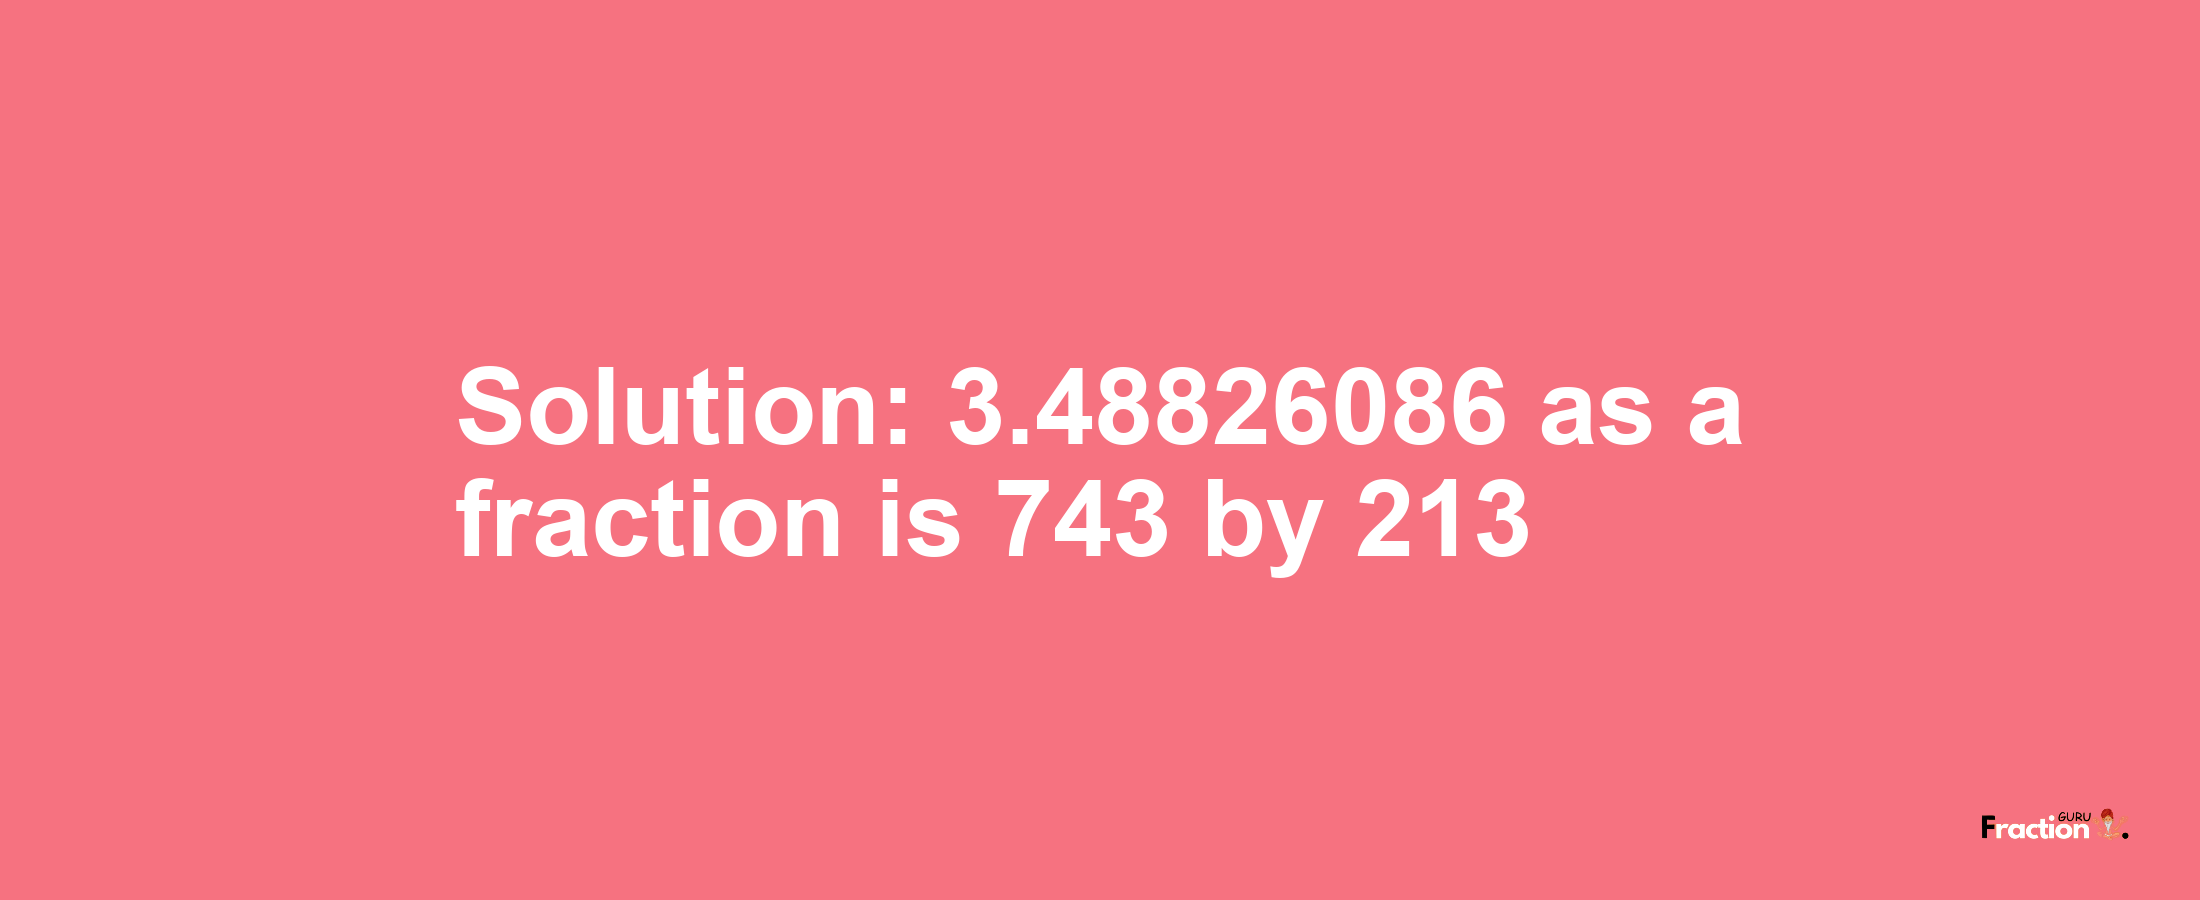 Solution:3.48826086 as a fraction is 743/213